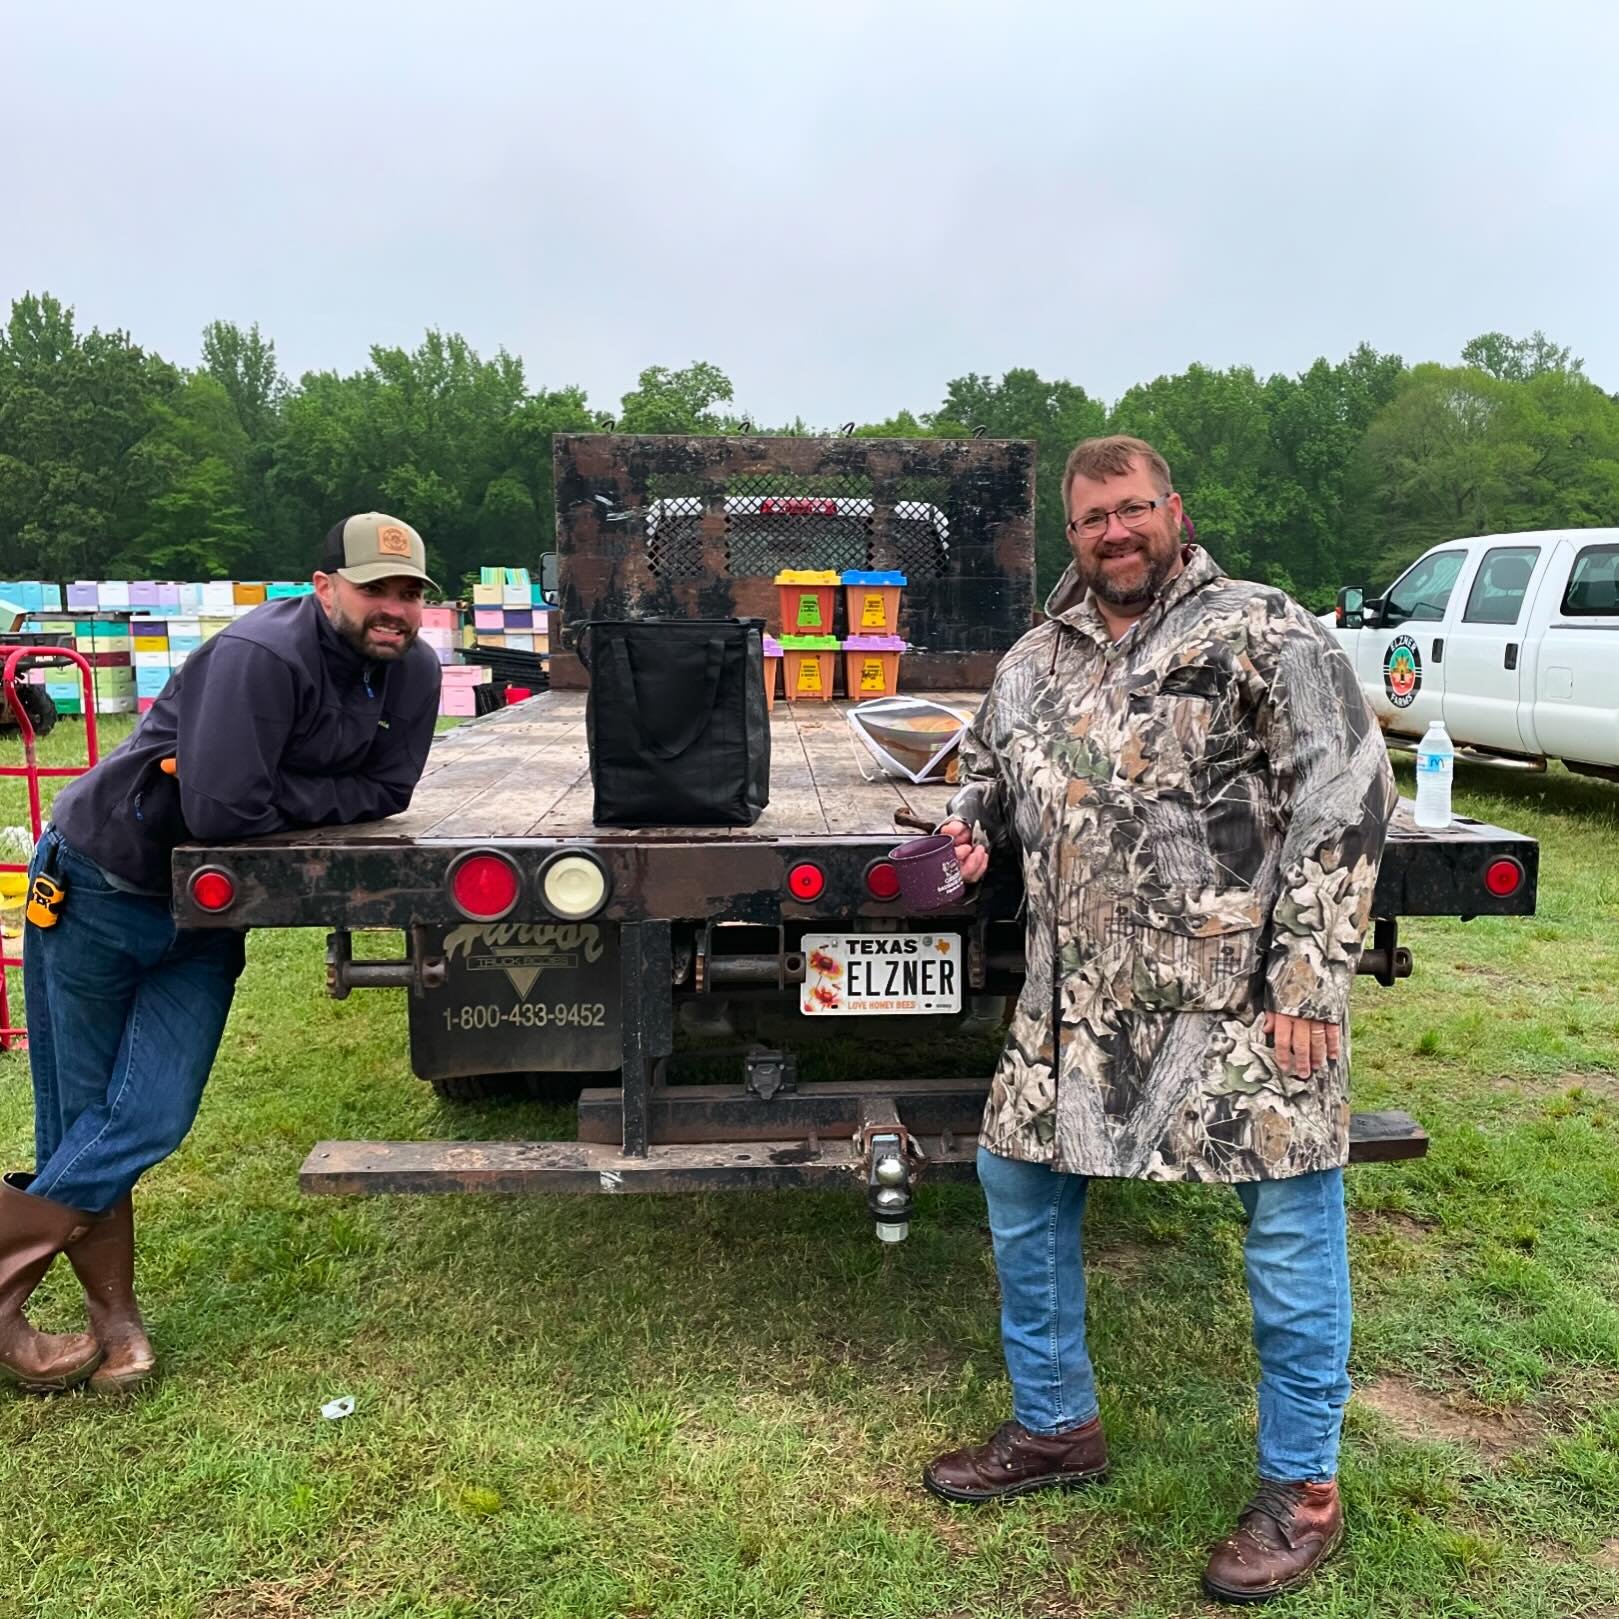 It&rsquo;s been a rainy but wonderful kick off to bee pick ups! So good to see y&rsquo;alls smiling faces each morning, we can&rsquo;t wait to do it again next weekend! A big thank you to everyone we saw this week, &amp; cheers to the start of a grea